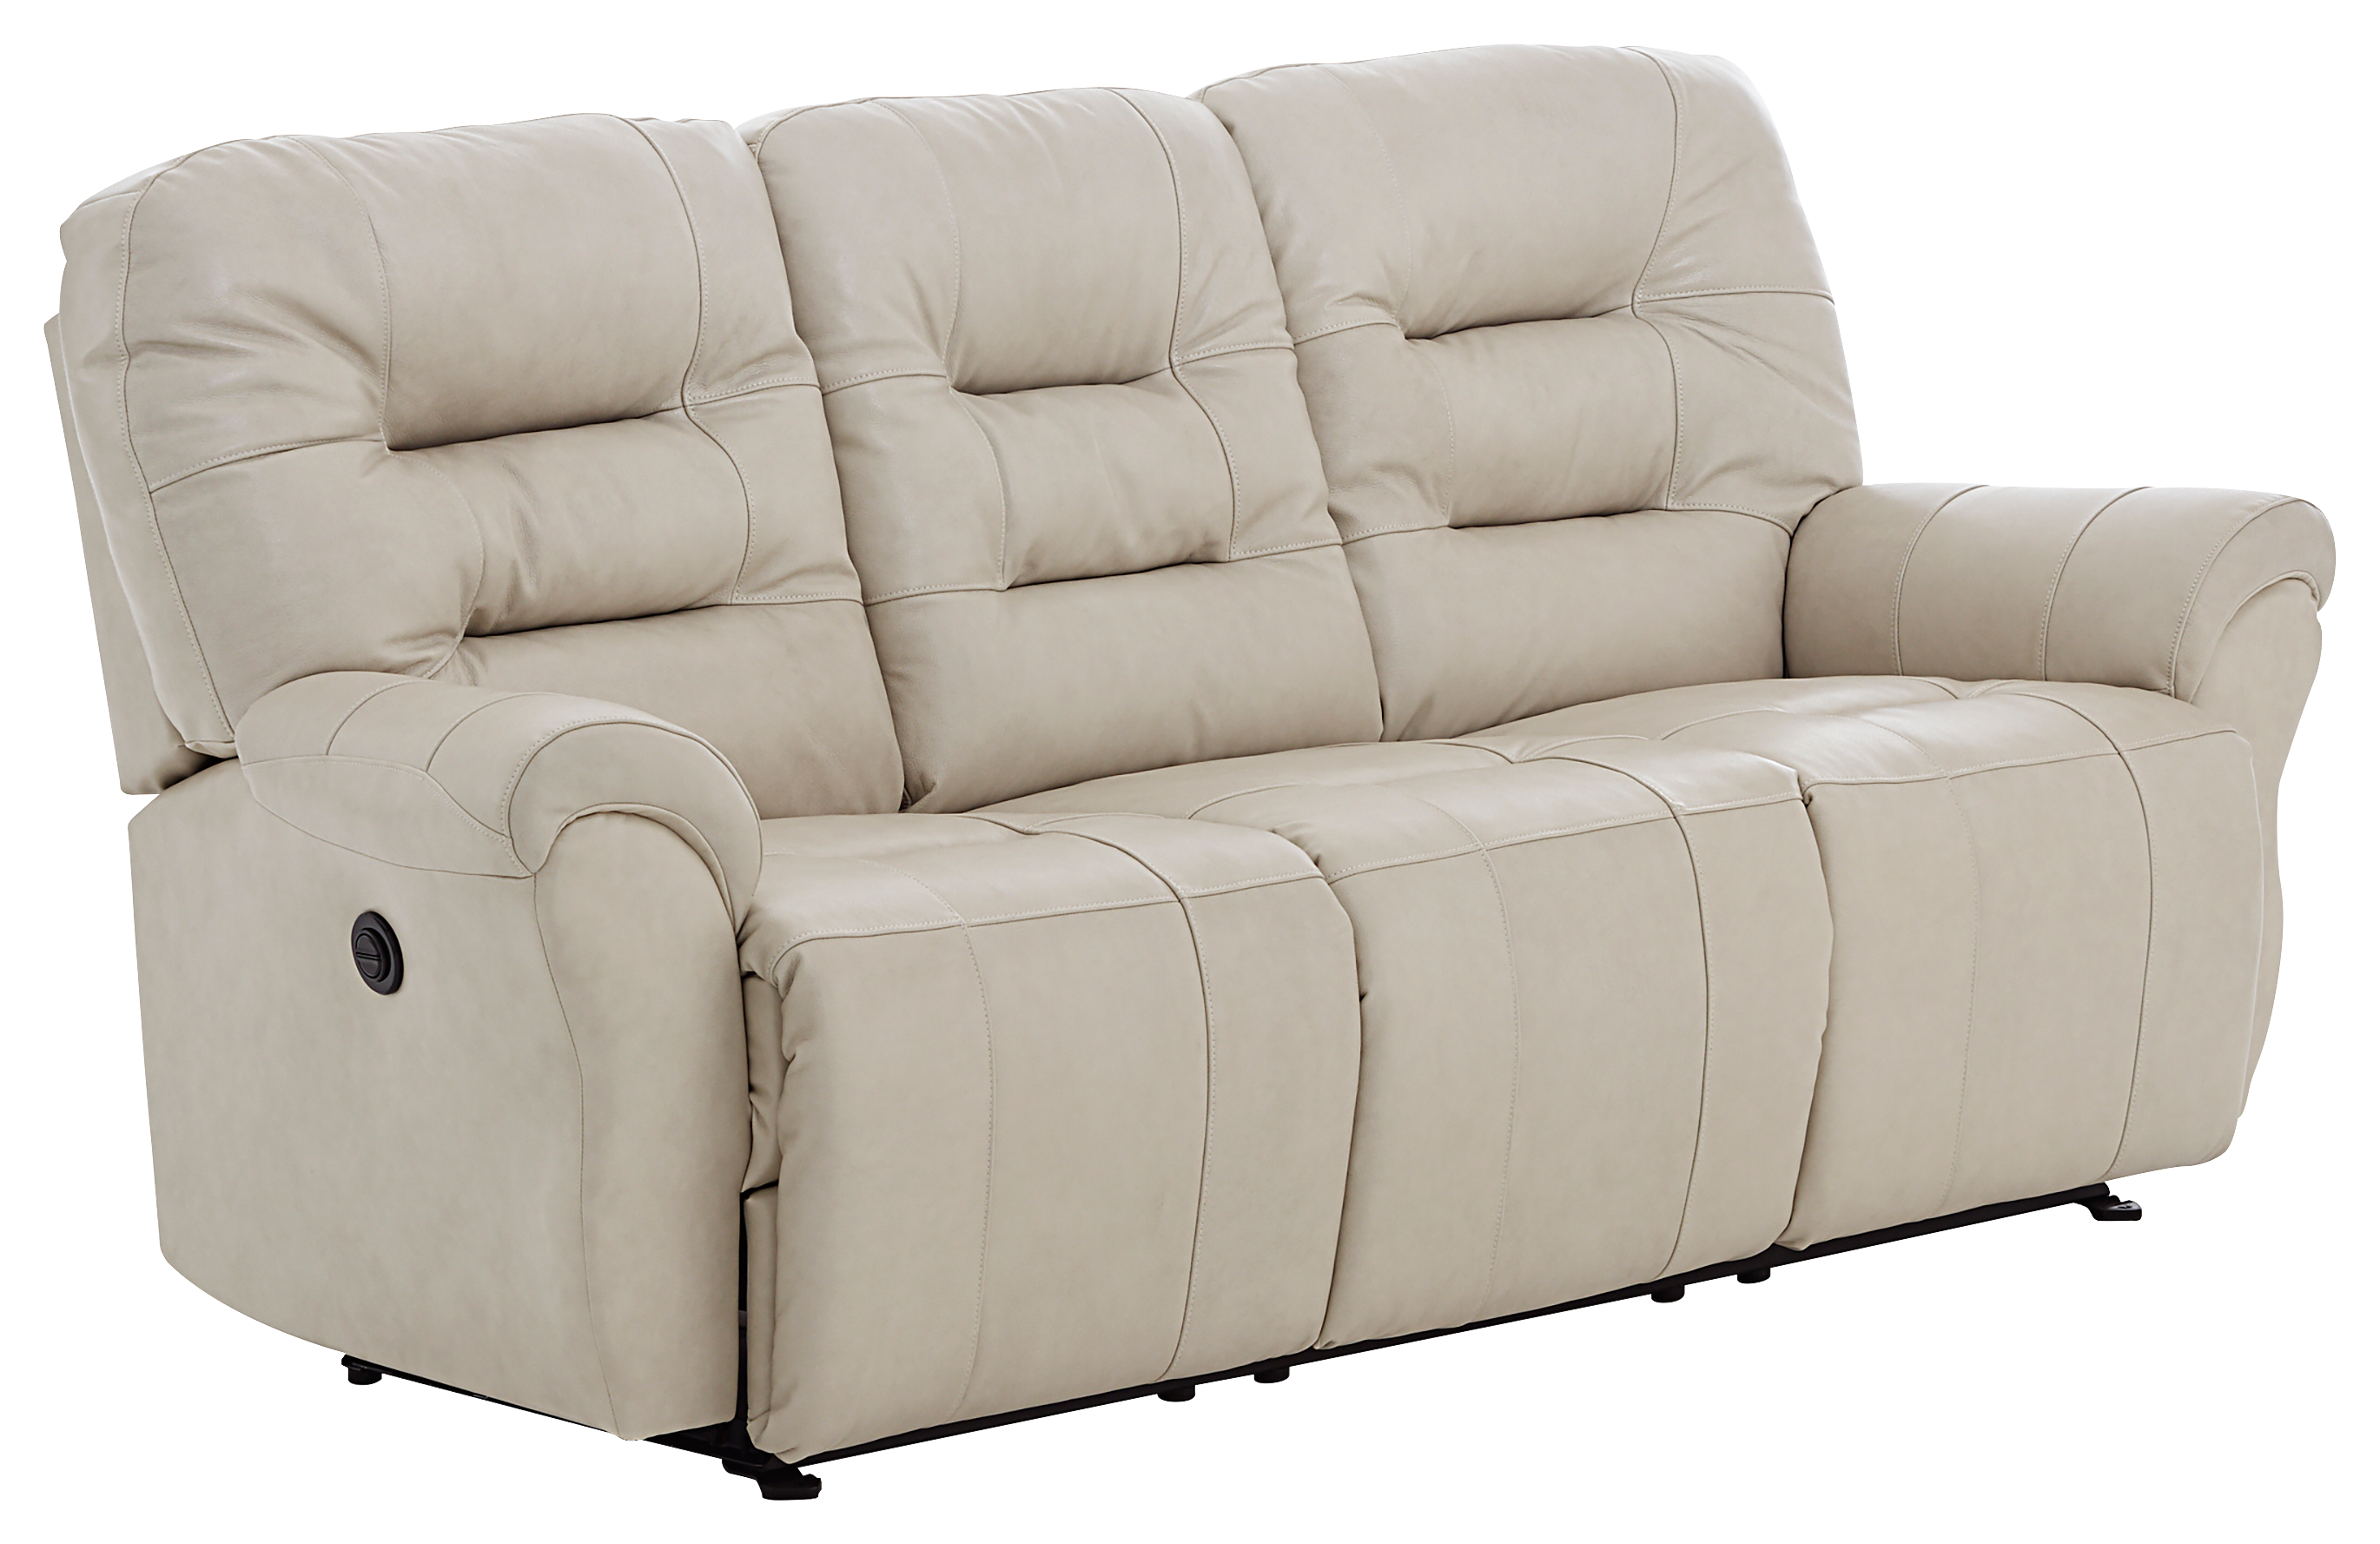 Best Home Furnishings Unity Furniture Collection Power Reclining Space Saver Sofa - Sand